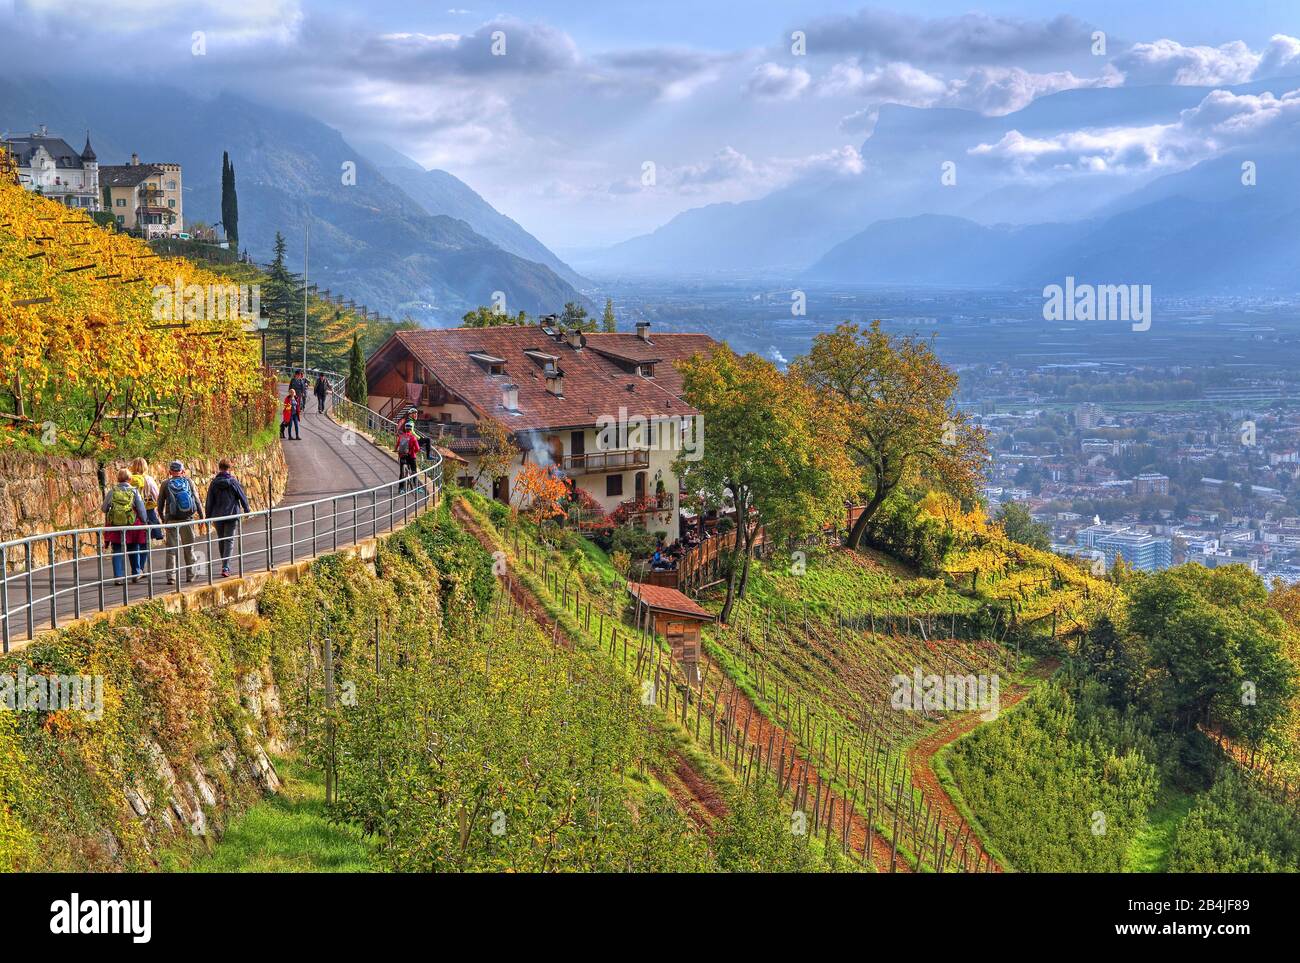 Promenade at the village with a view of the Adige Valley, Dorf Tirol, Burggrafenamt, South Tyrol, Italy Stock Photo